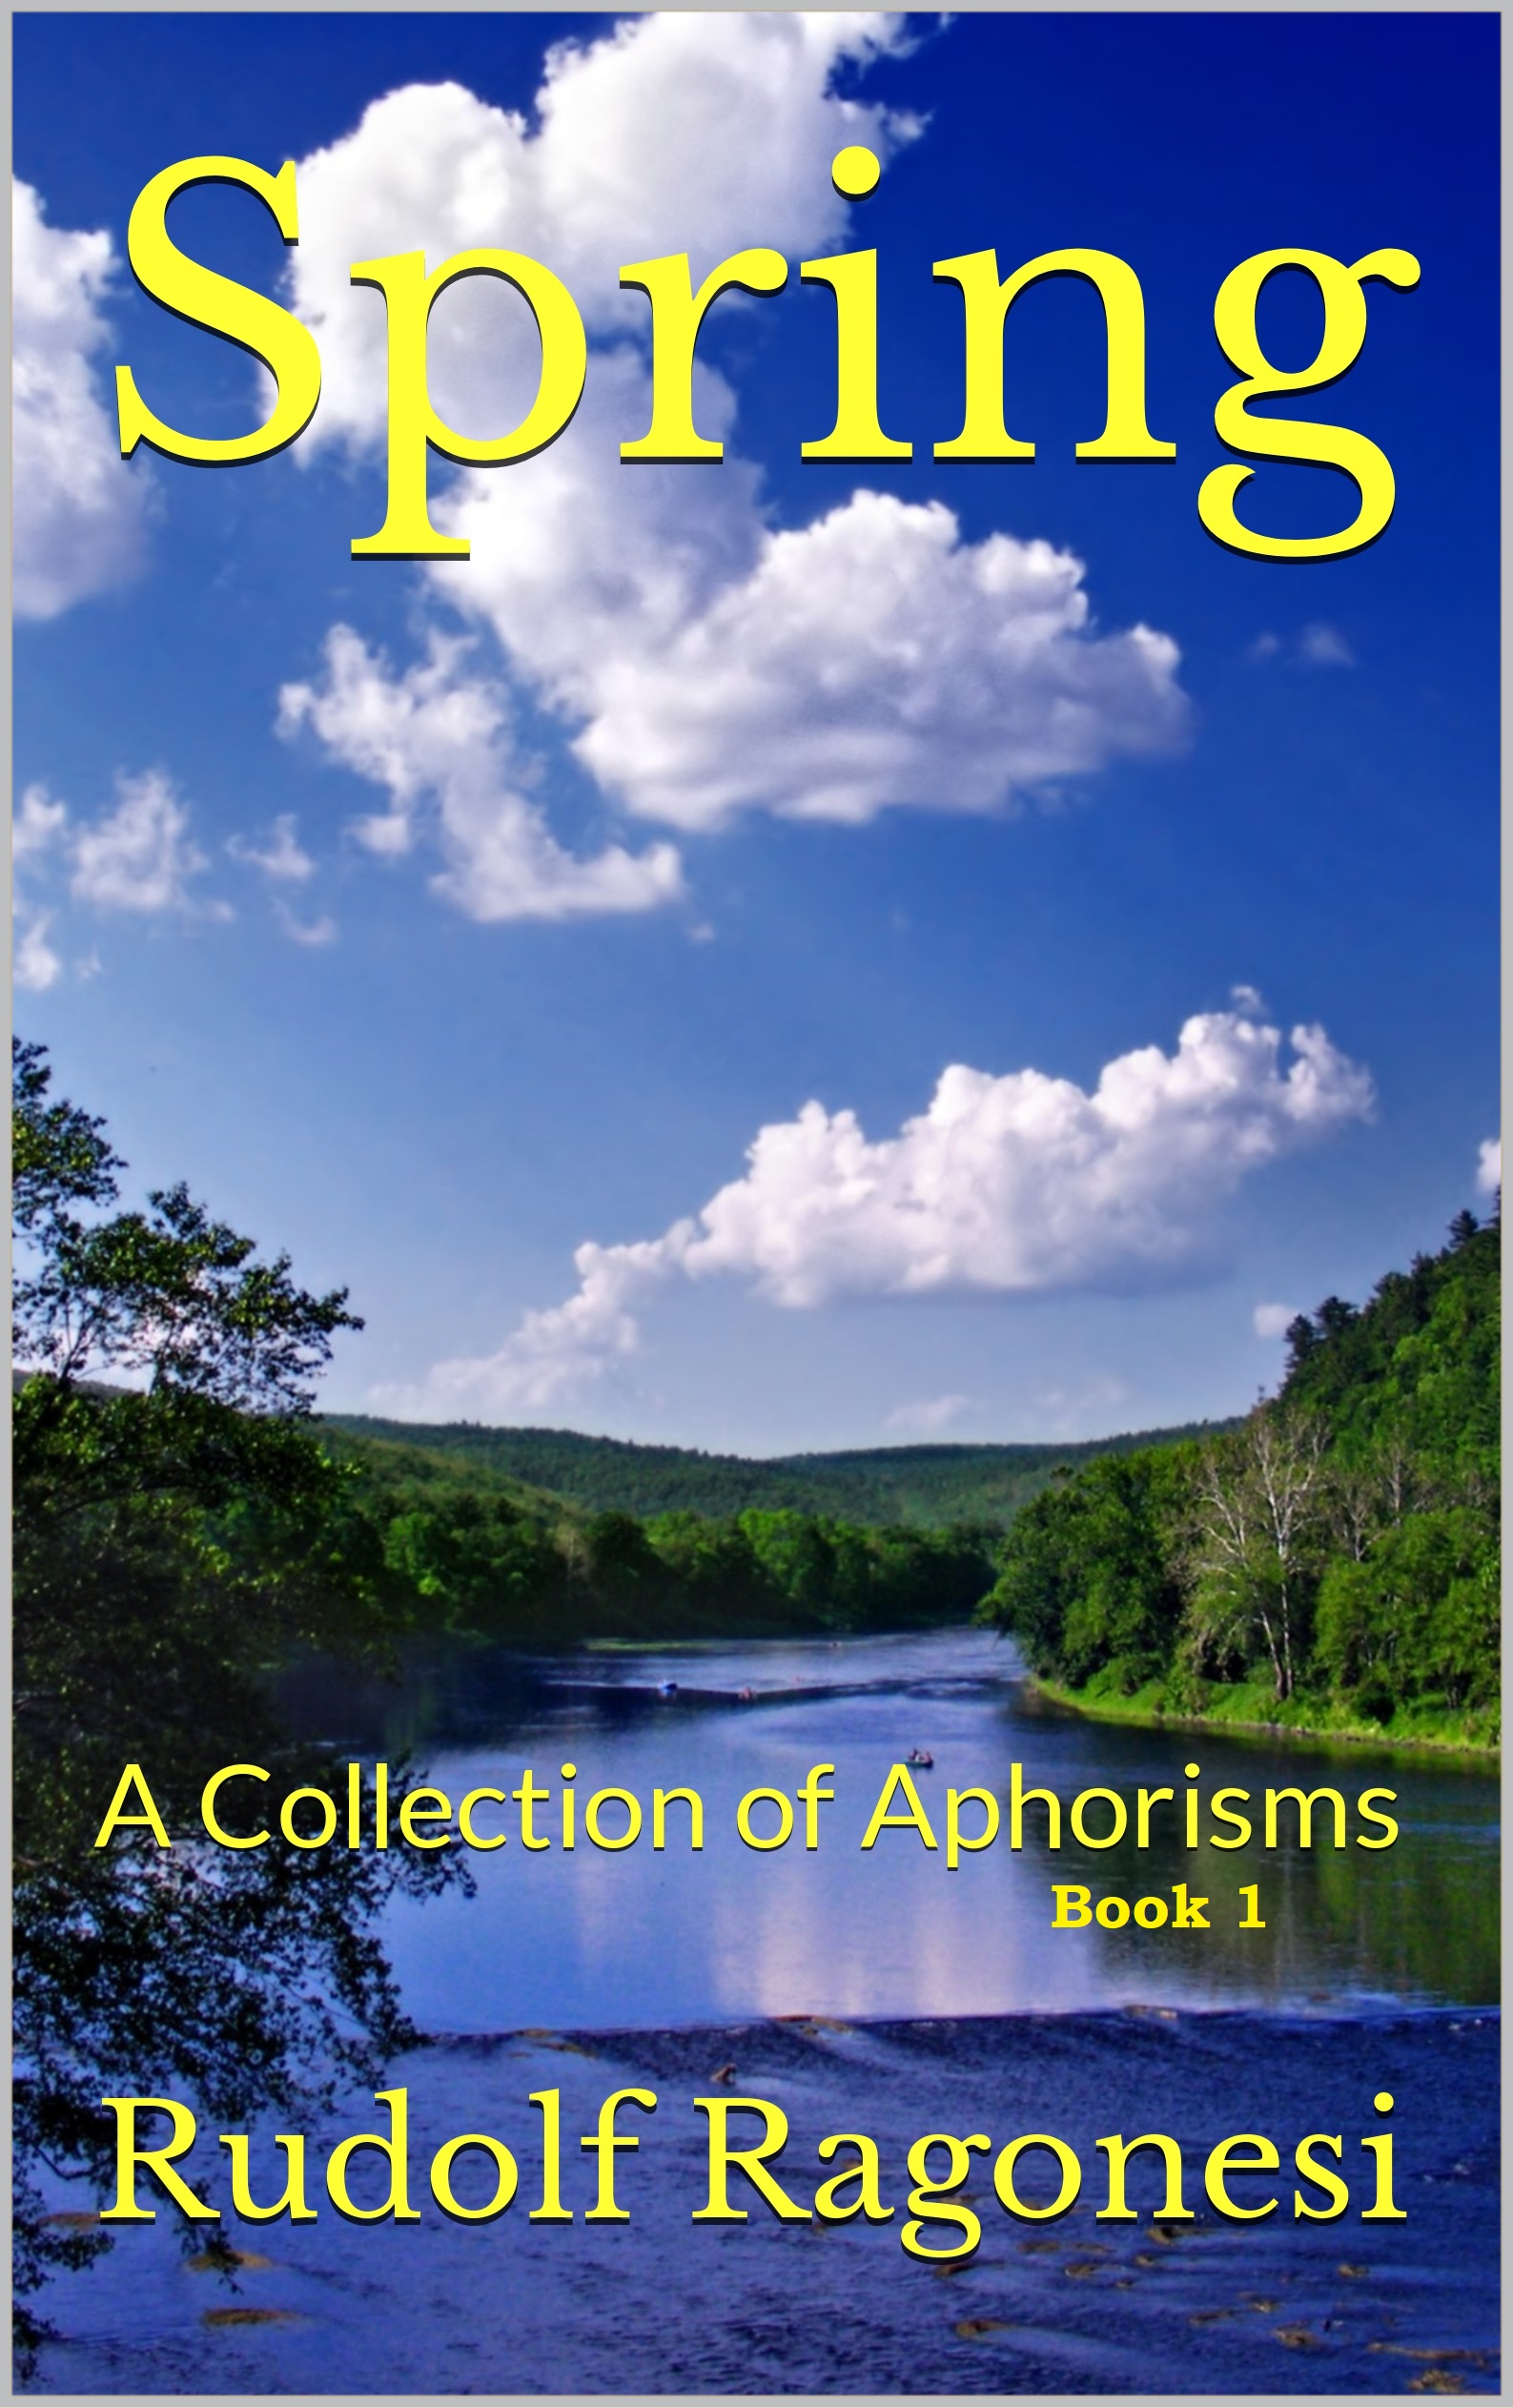 A Collection of Aphorisms Book 1 Spring book 1, Standing on the Banks Looking on by Rudolf Ragonesi